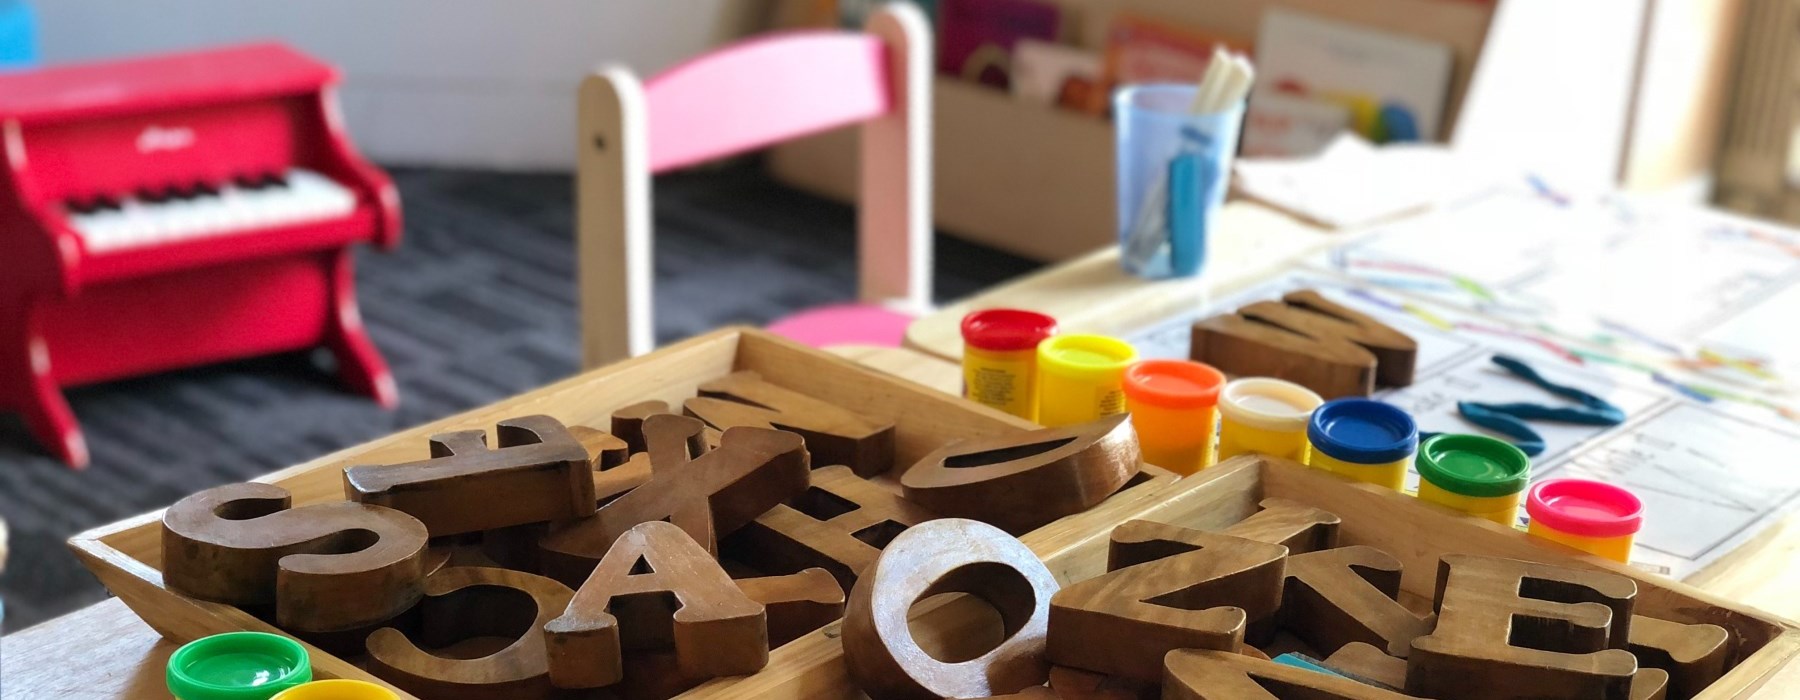 Play dough and block letters on a student's desk